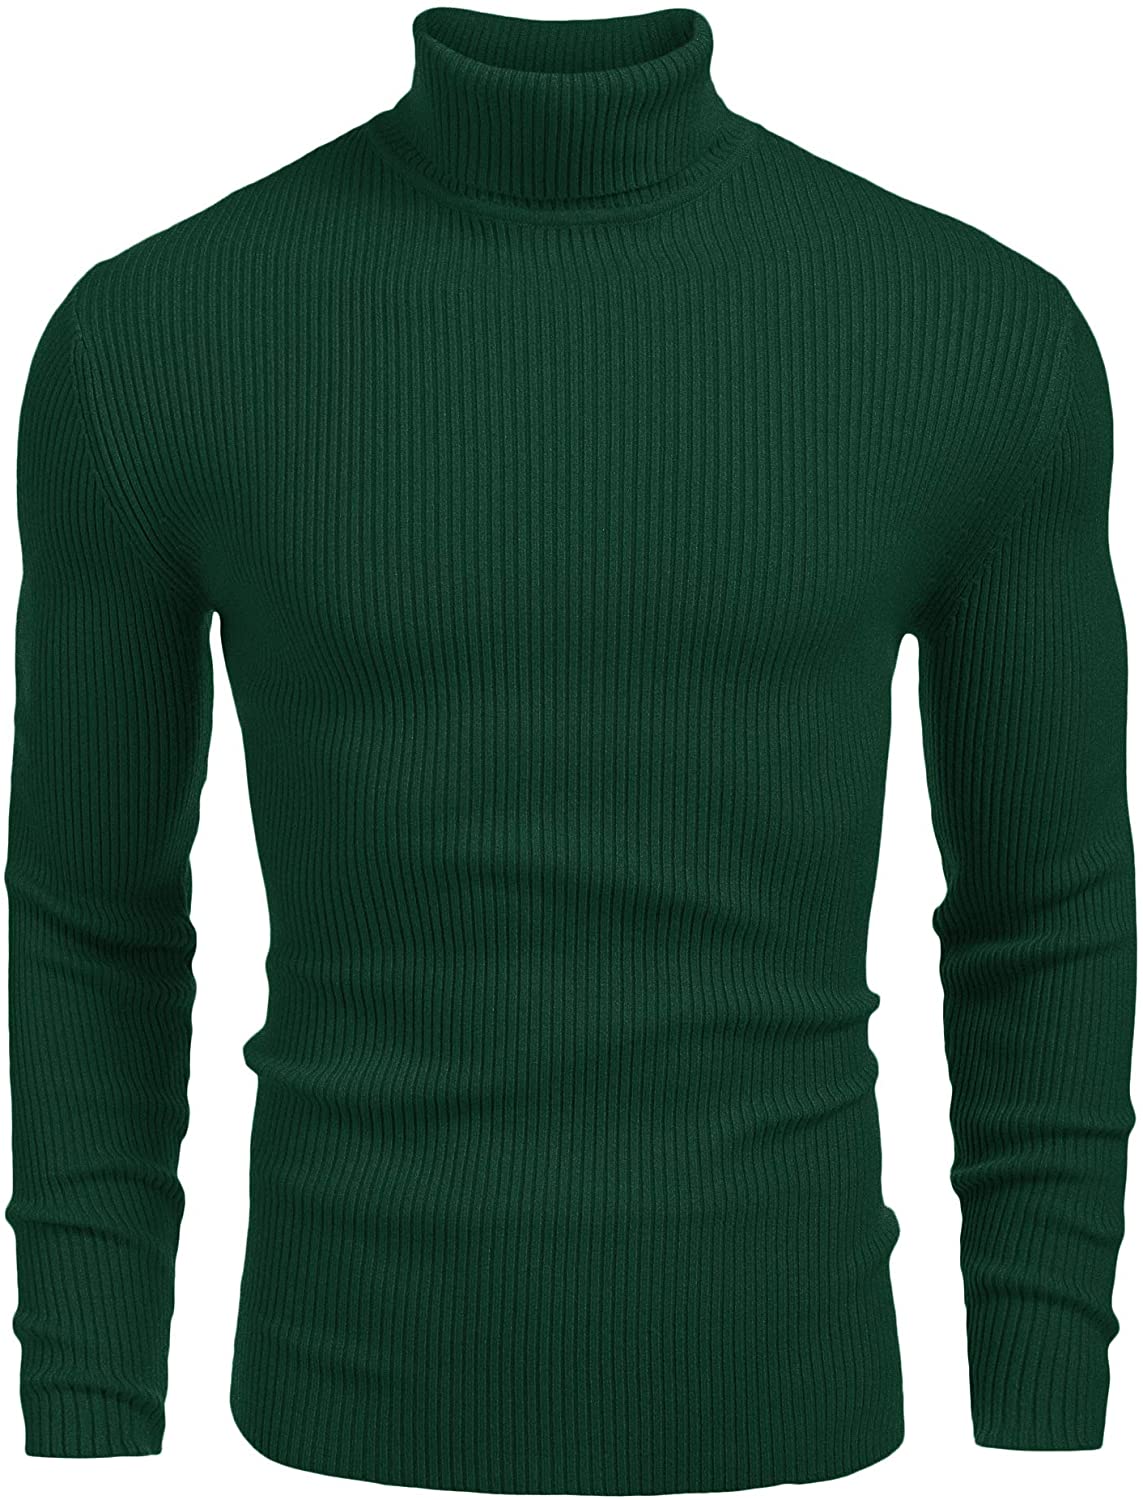 COOFANDY Mens Ribbed Slim Fit Knitted Pullover Turtleneck Sweater | eBay